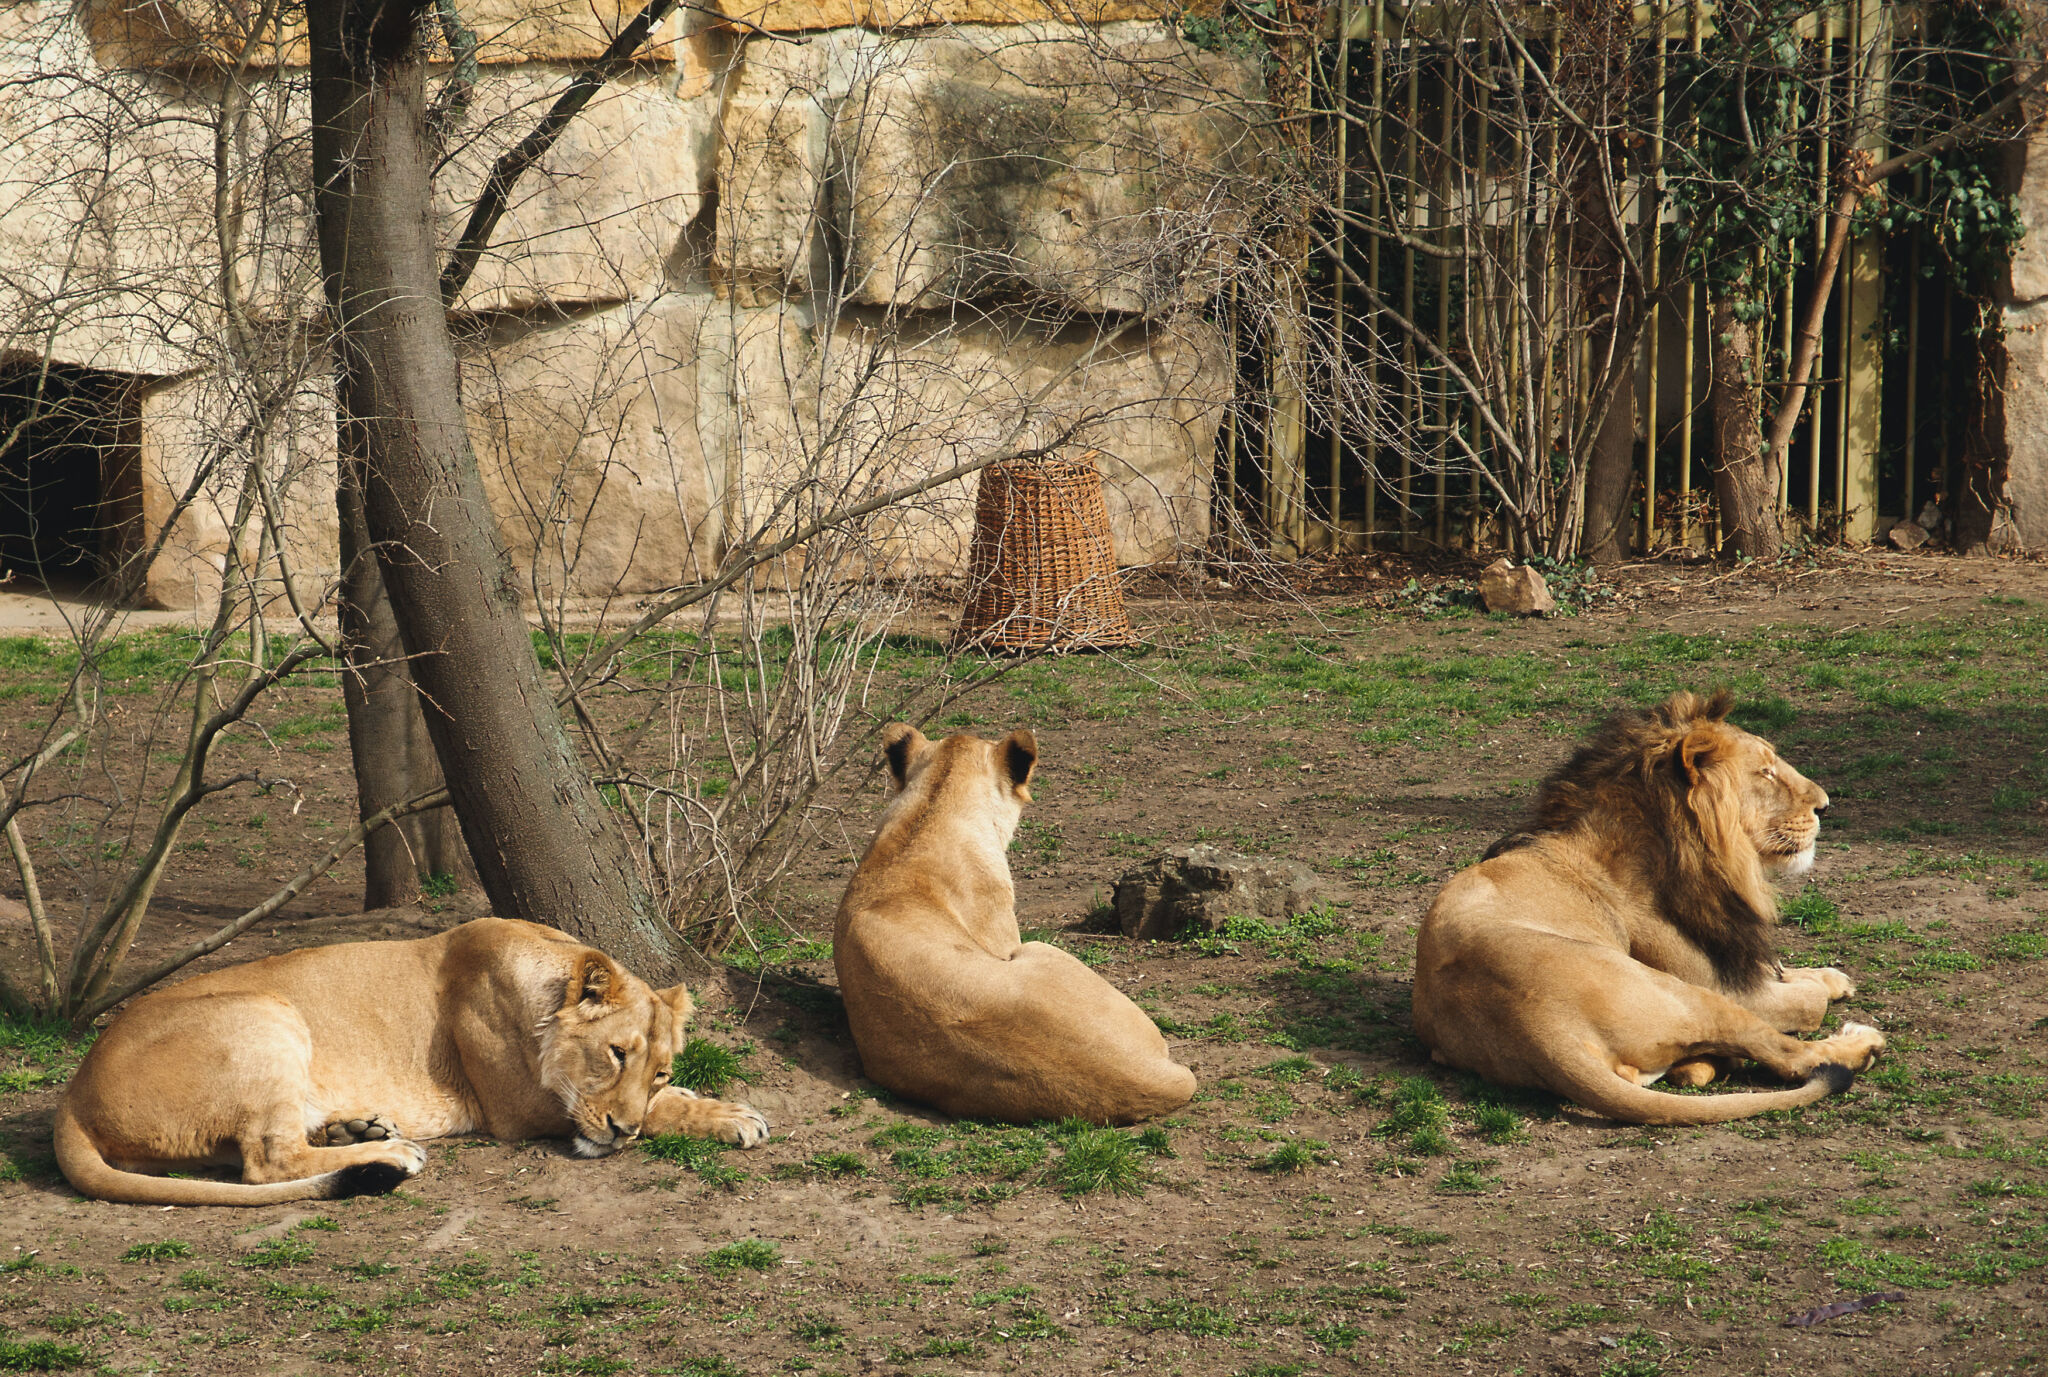 Lions In Zoo | Copyright-free photo (by M. Vorel) | LibreShot